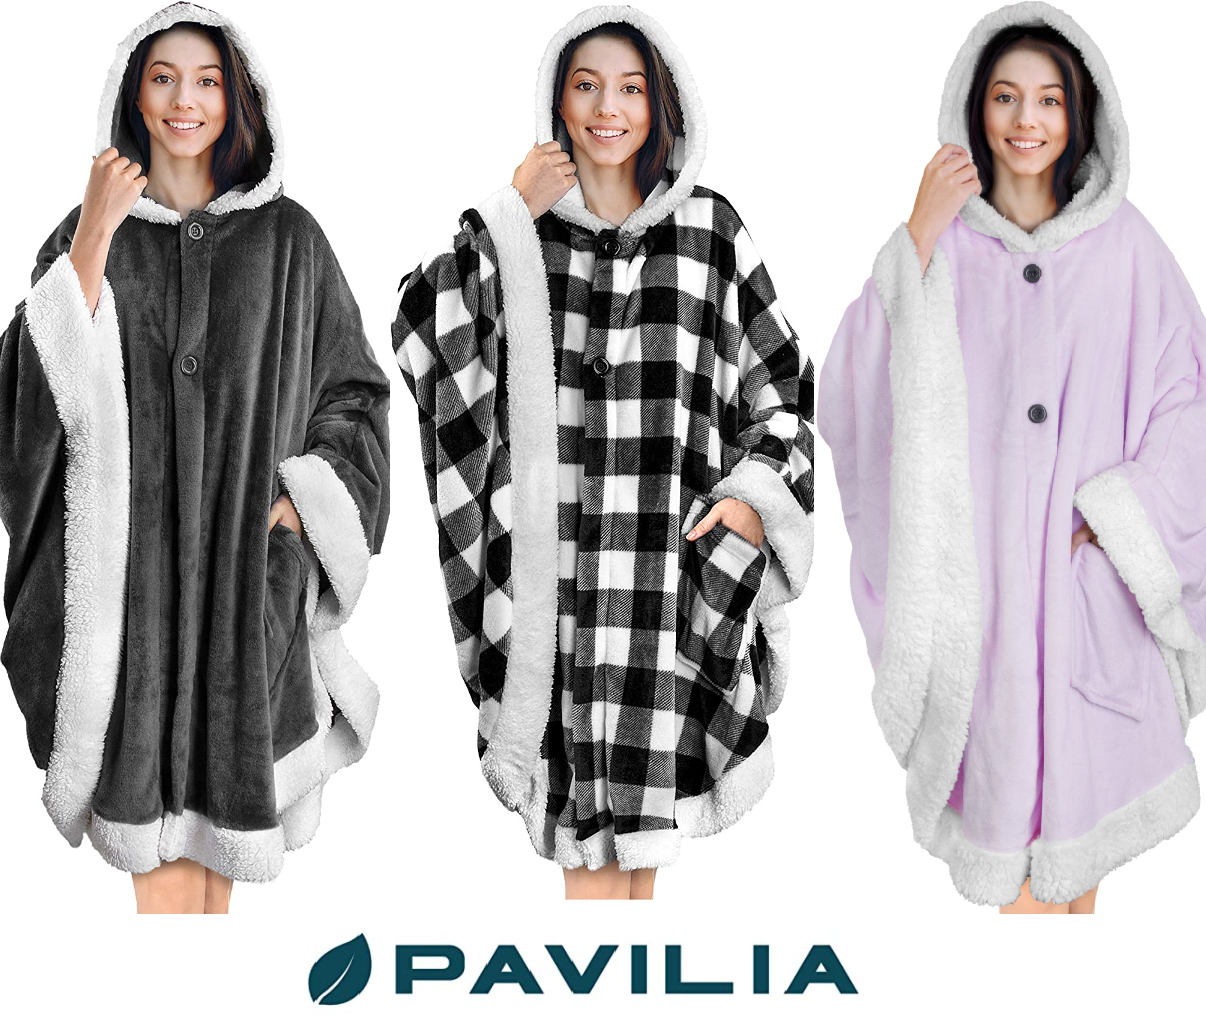 Poncho Wearable Hooded Blanket Wrap Cape With Hood Pockets ...